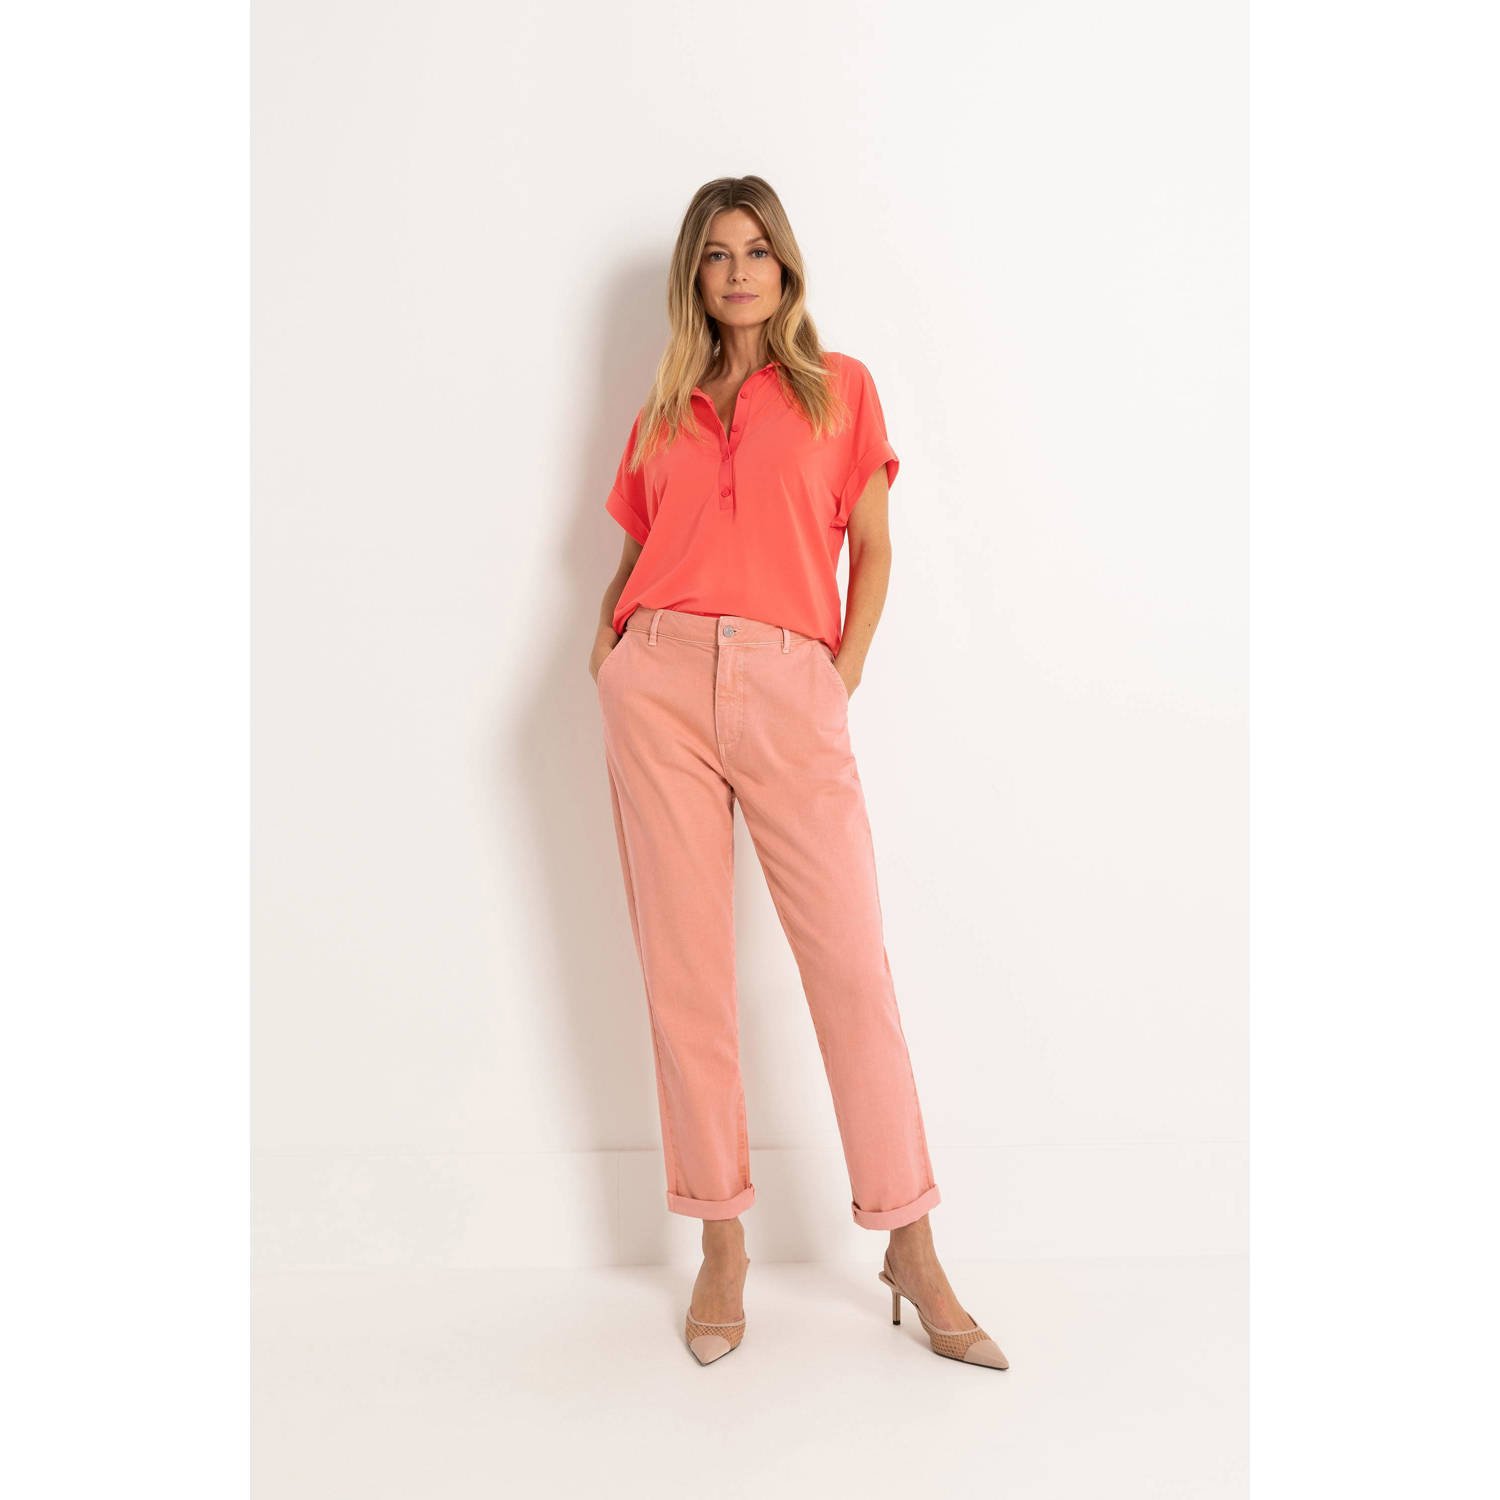 Claudia Sträter cropped tapered fit broek zalm